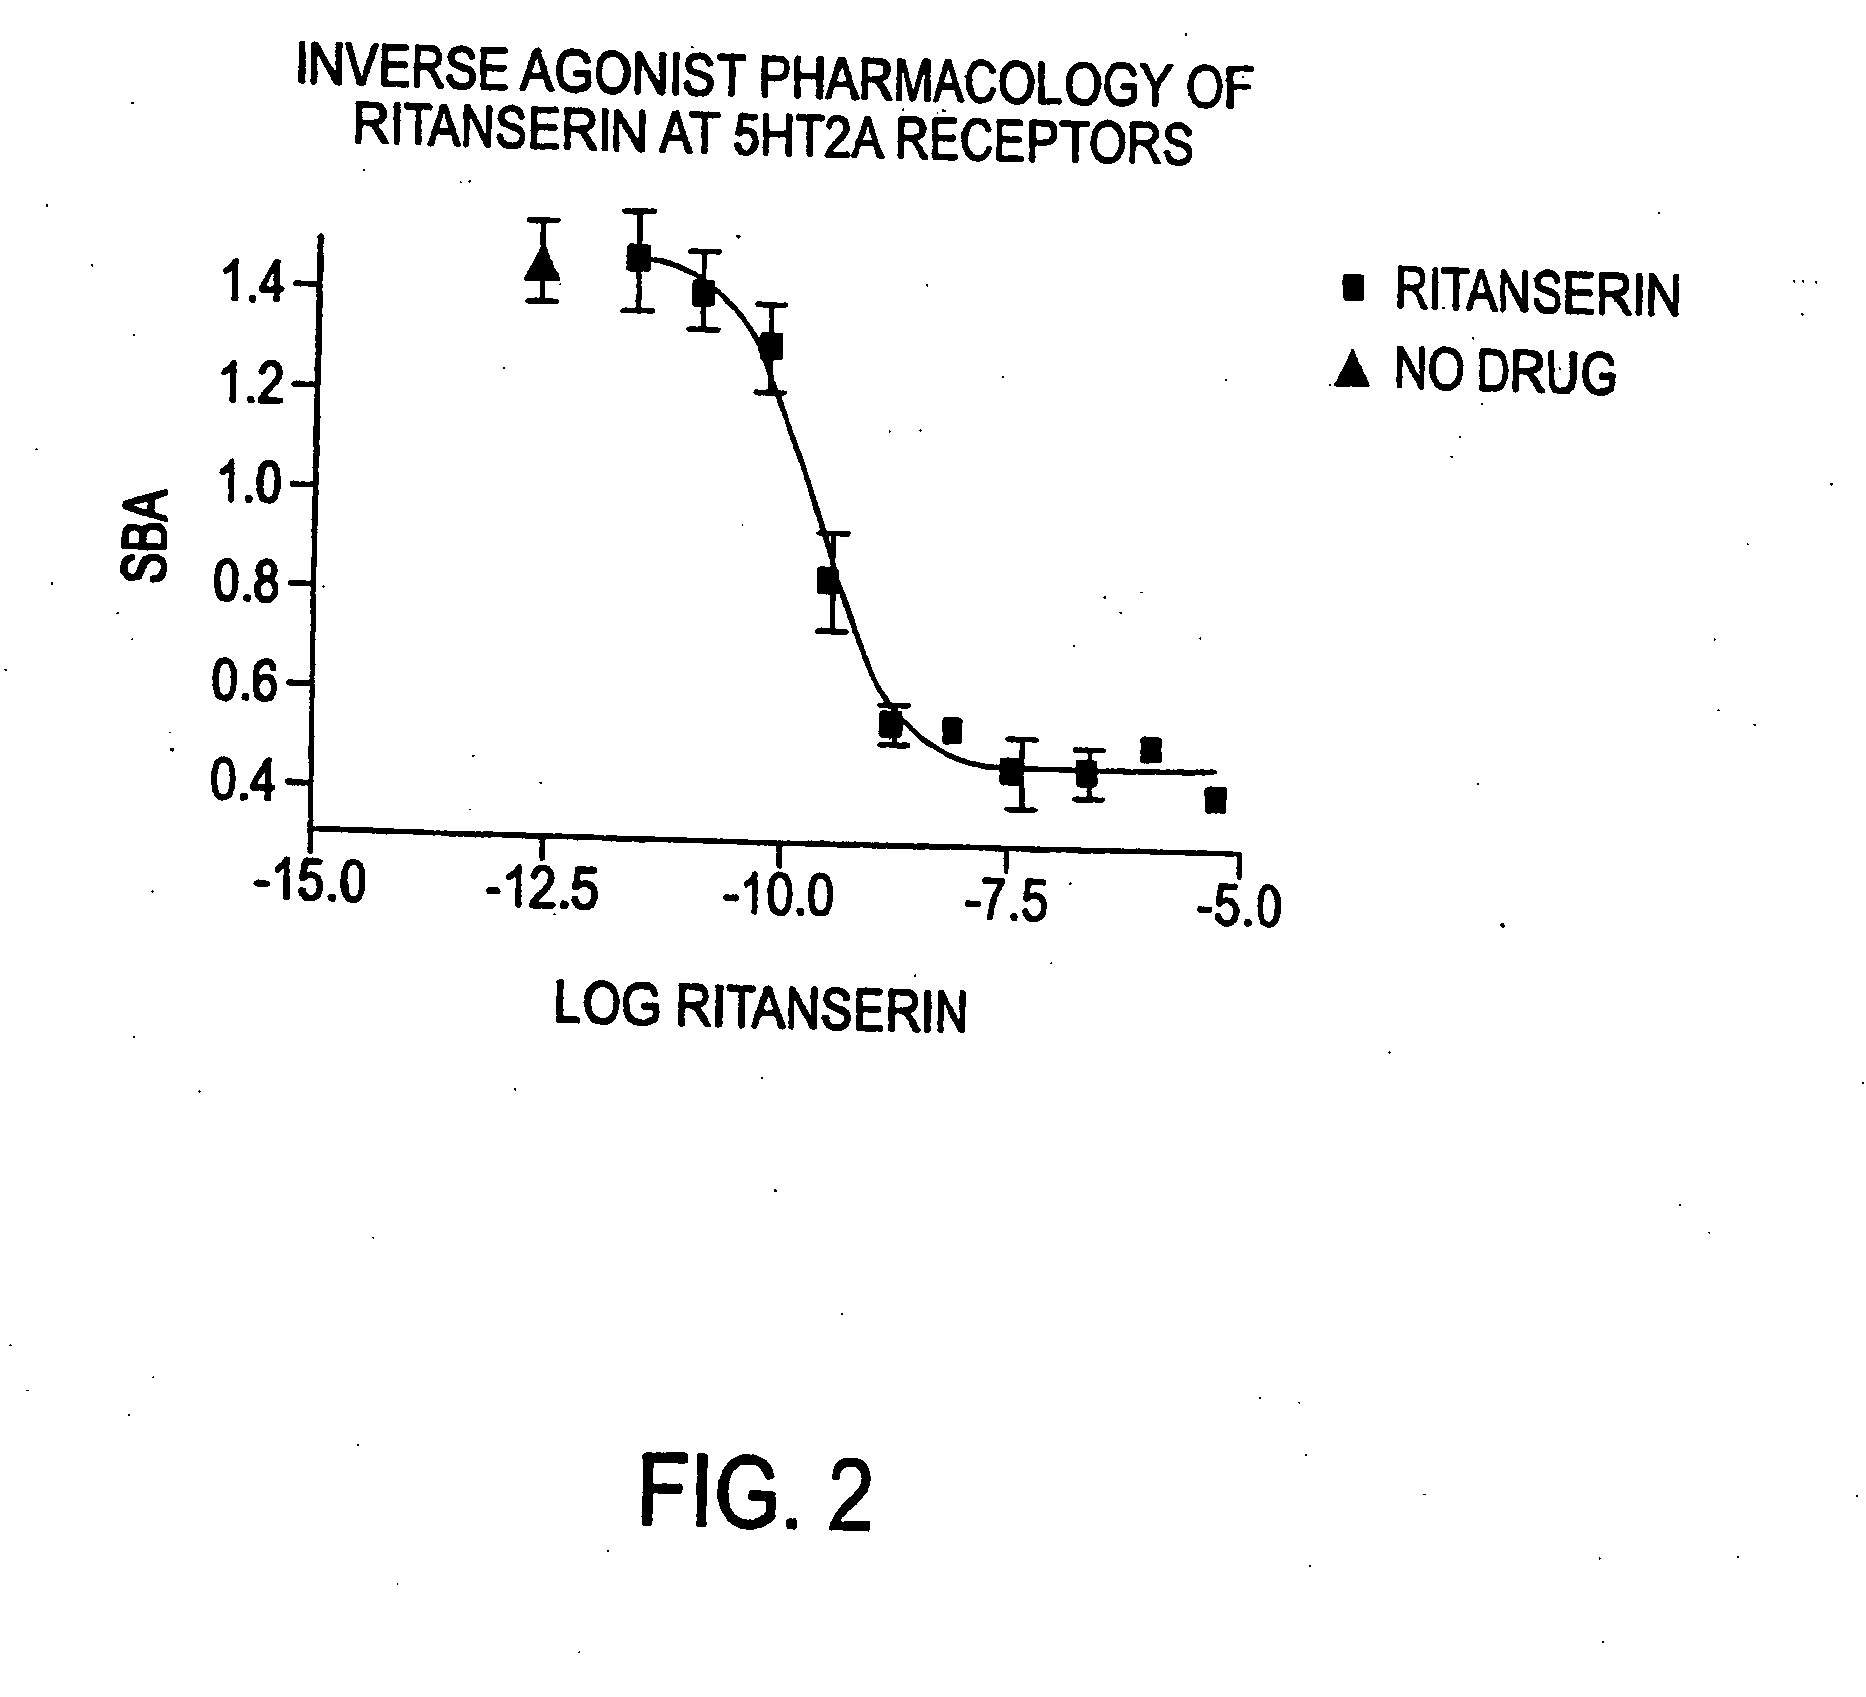 Methods of identifying inverse agonists of the serotonin 2A receptor